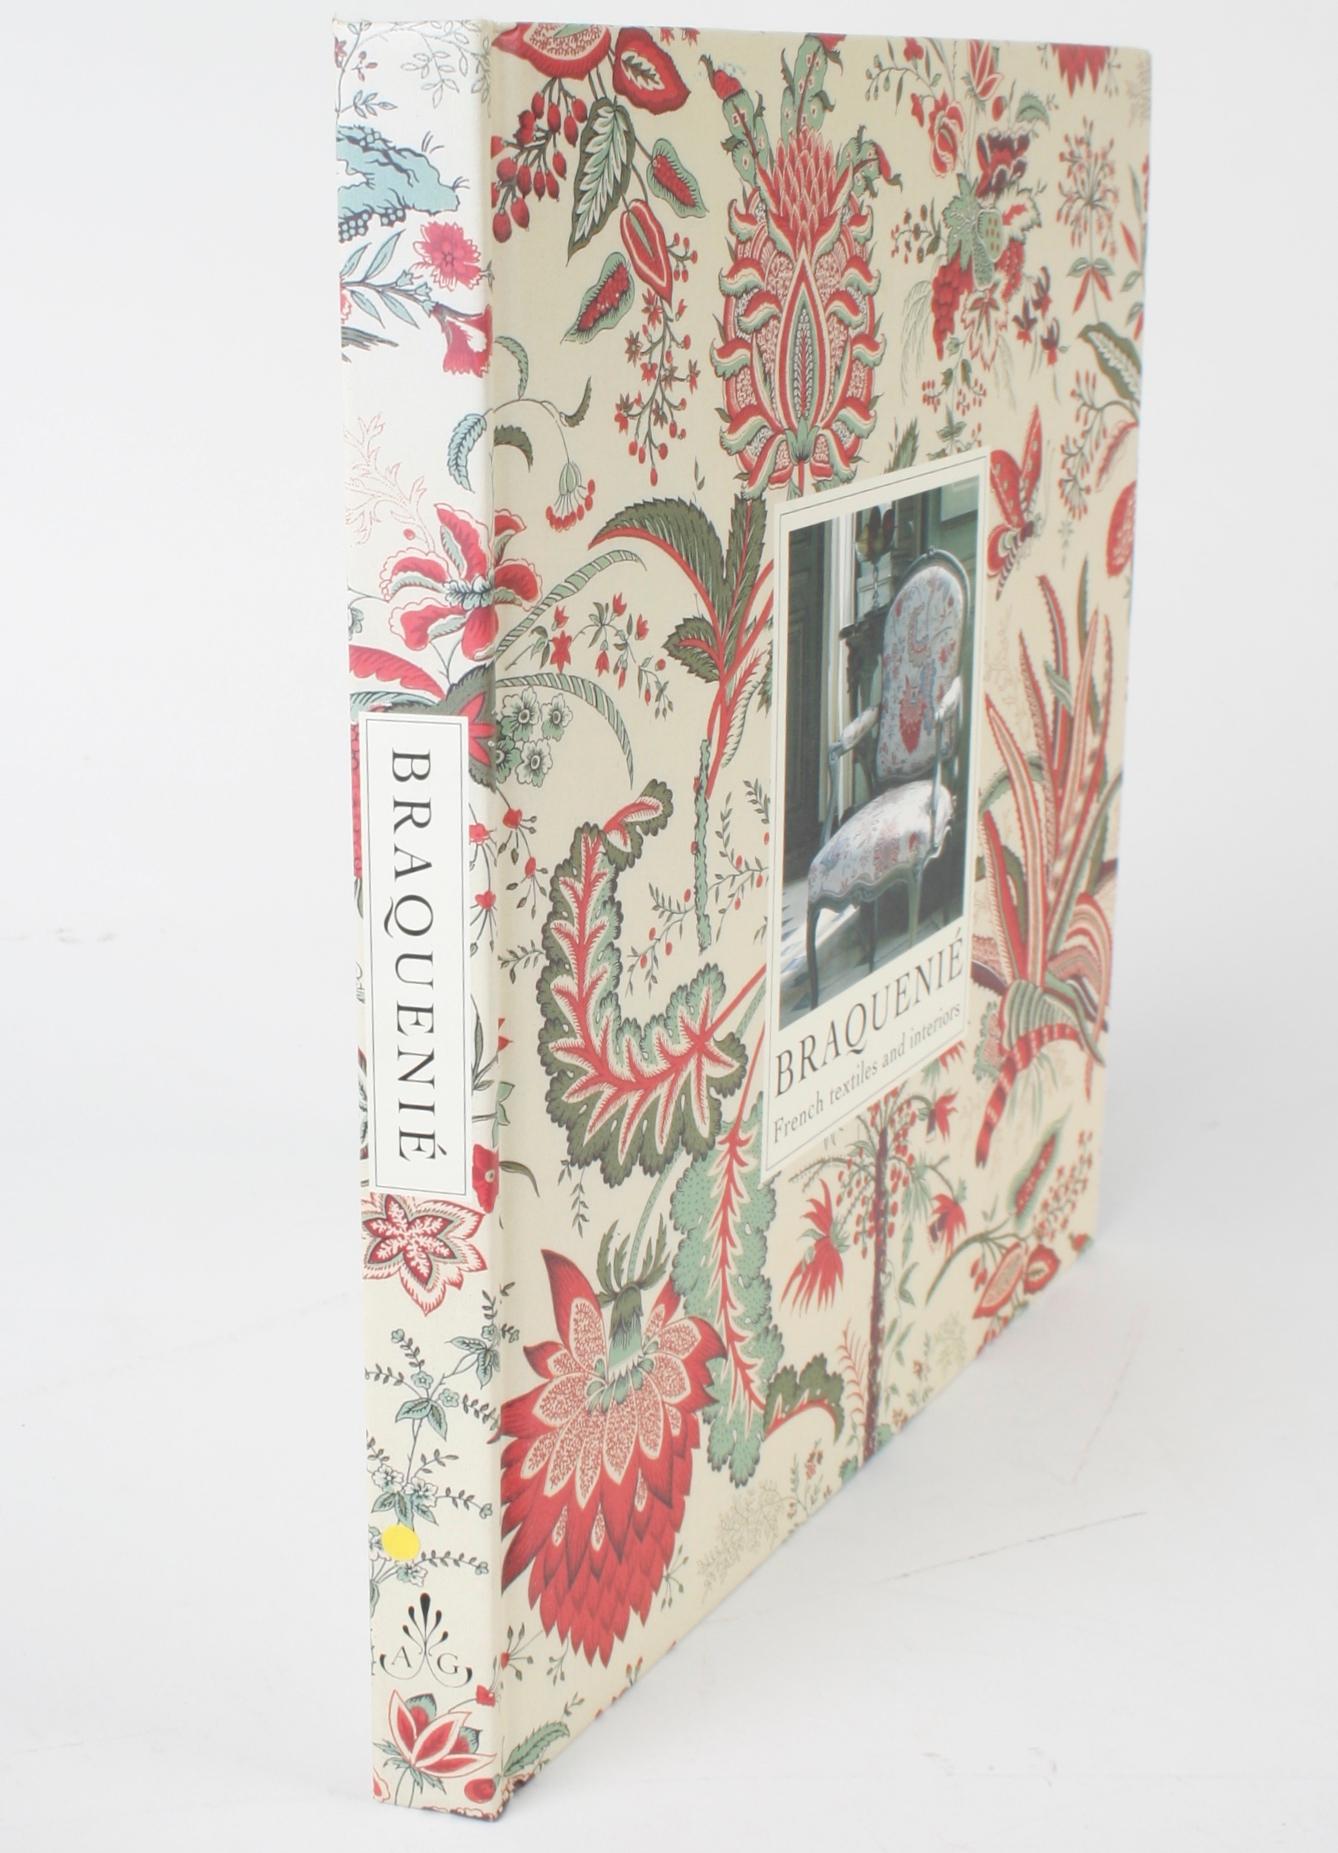 Braquenié French Textiles and Interiors since 1823, Jacques Sirat, First Edition 13